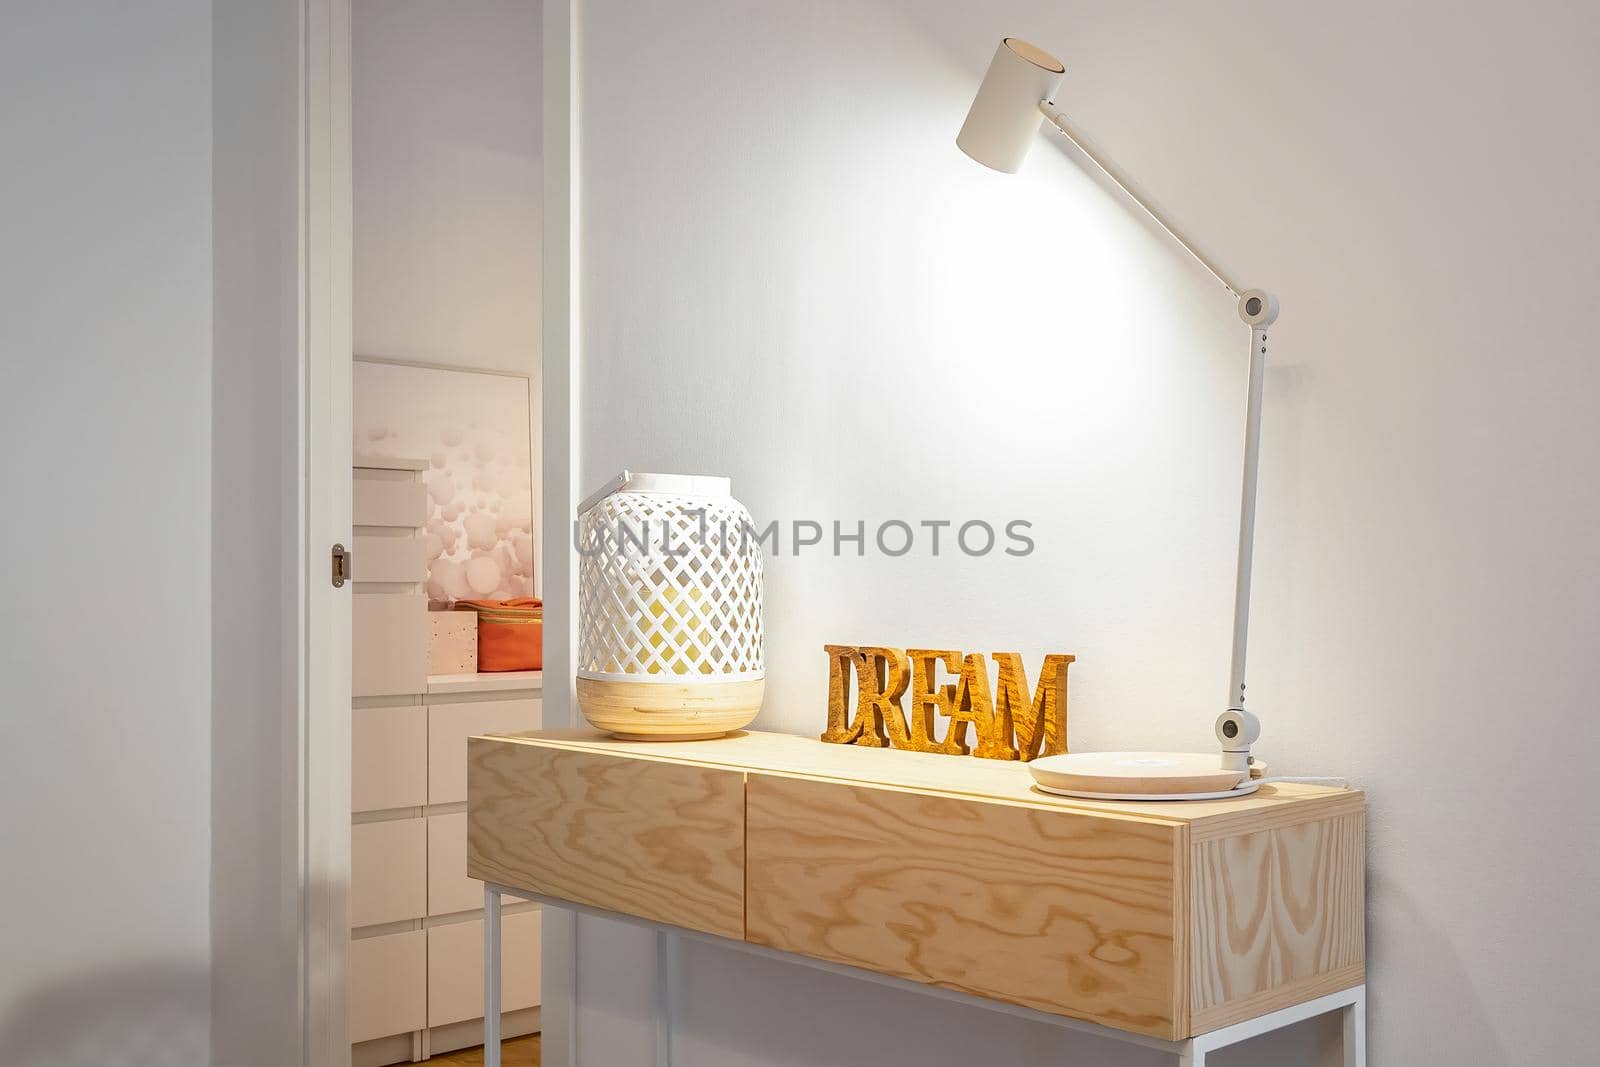 Table lamp, candle holder and wooden word Dream at home with a room at the background